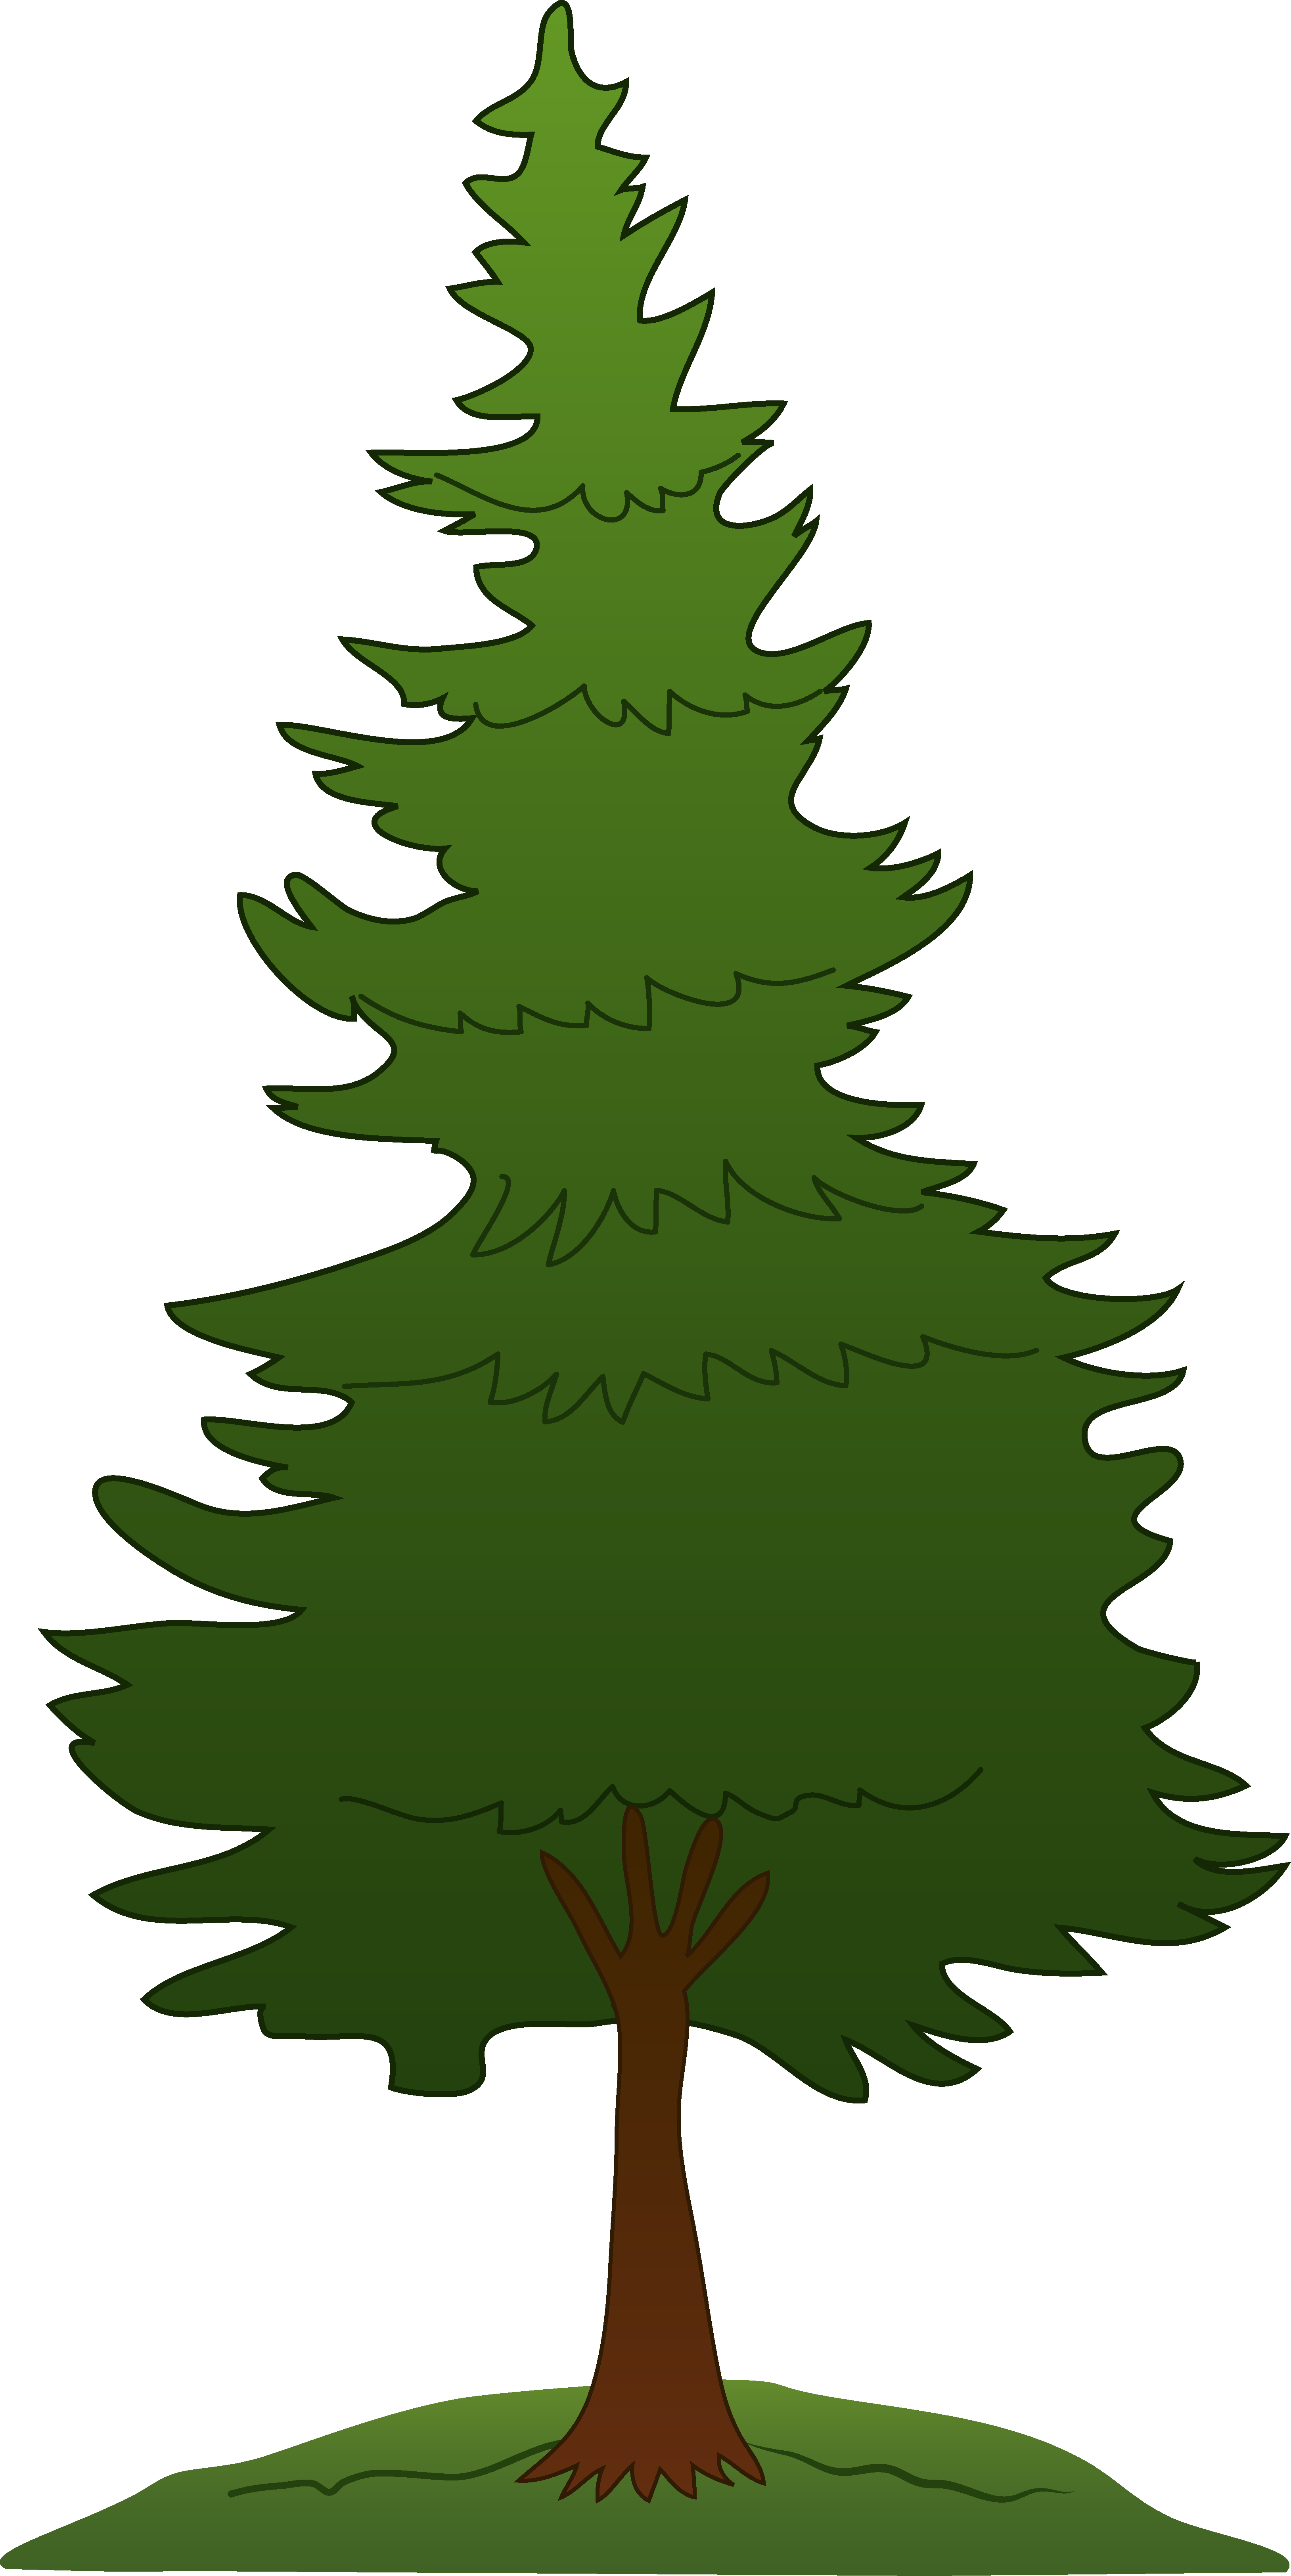 Woodland clipart fir tree. White pine silhouette at